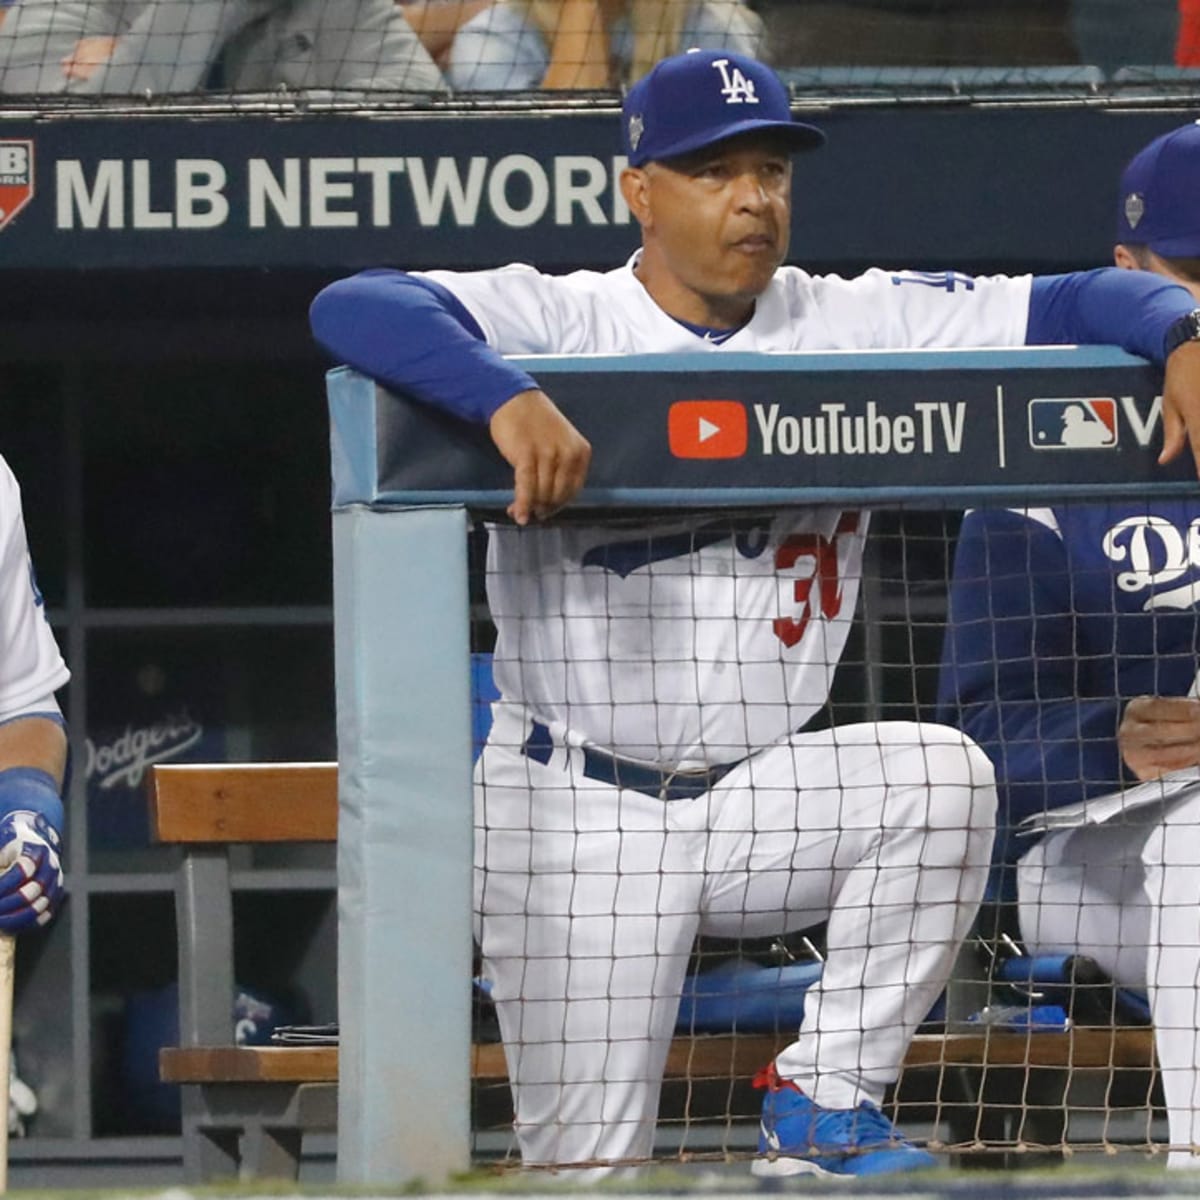 Los Angeles Dodgers counting on Manny Machado to push them over Series hump